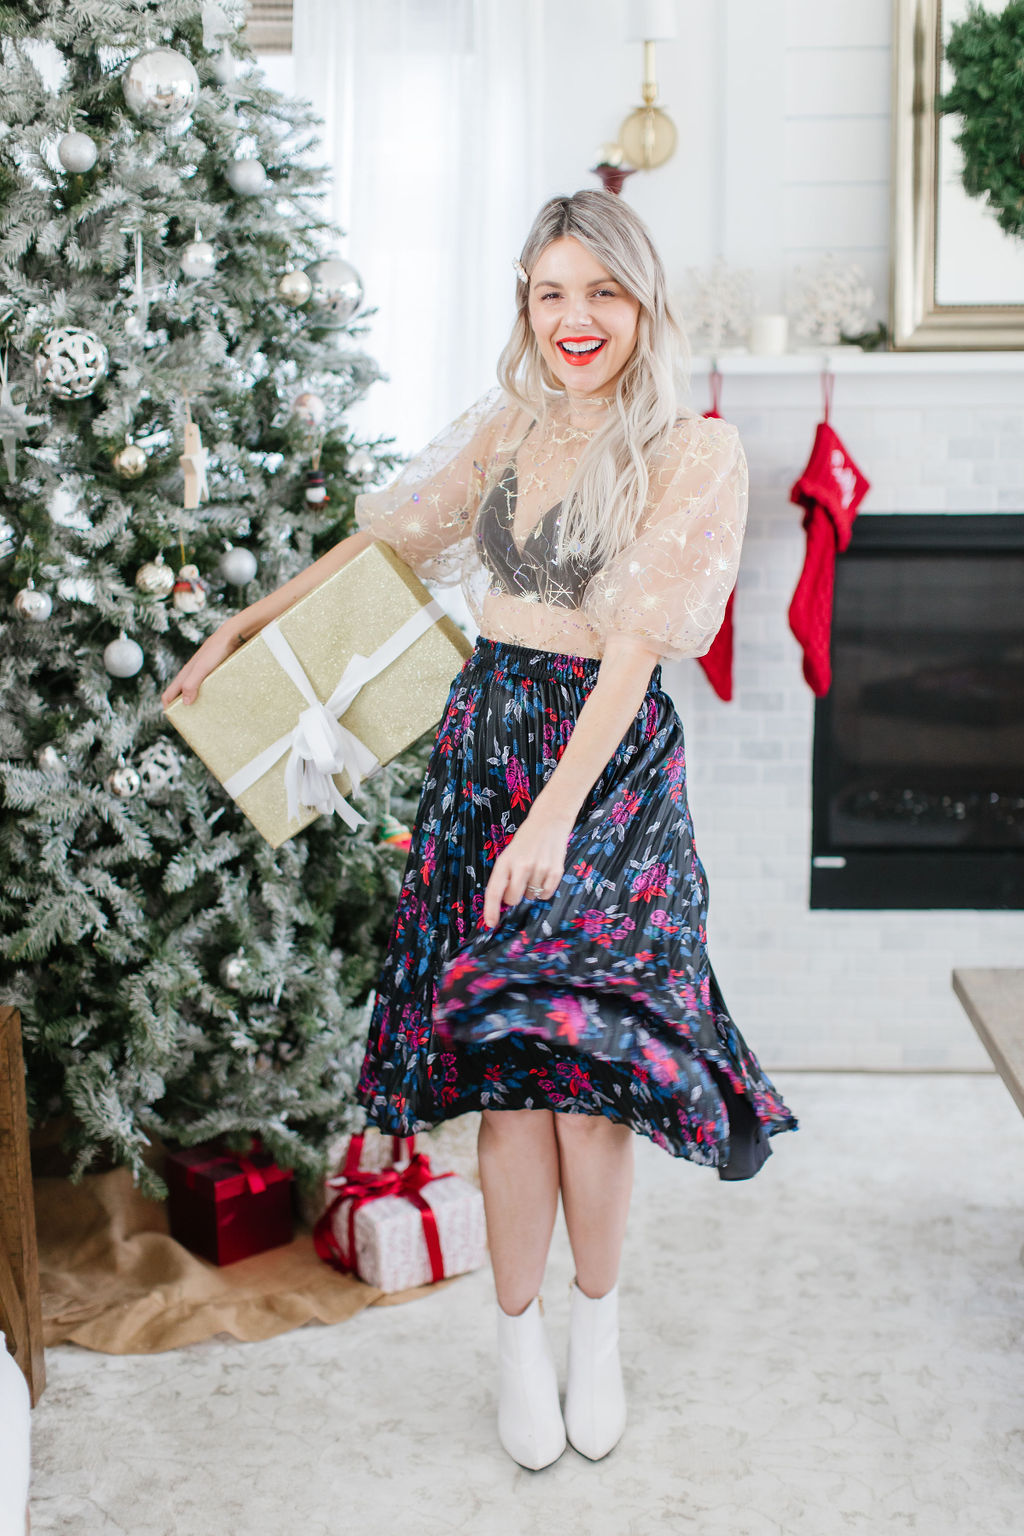 mystical top and skirt 3 favorite holiday looks